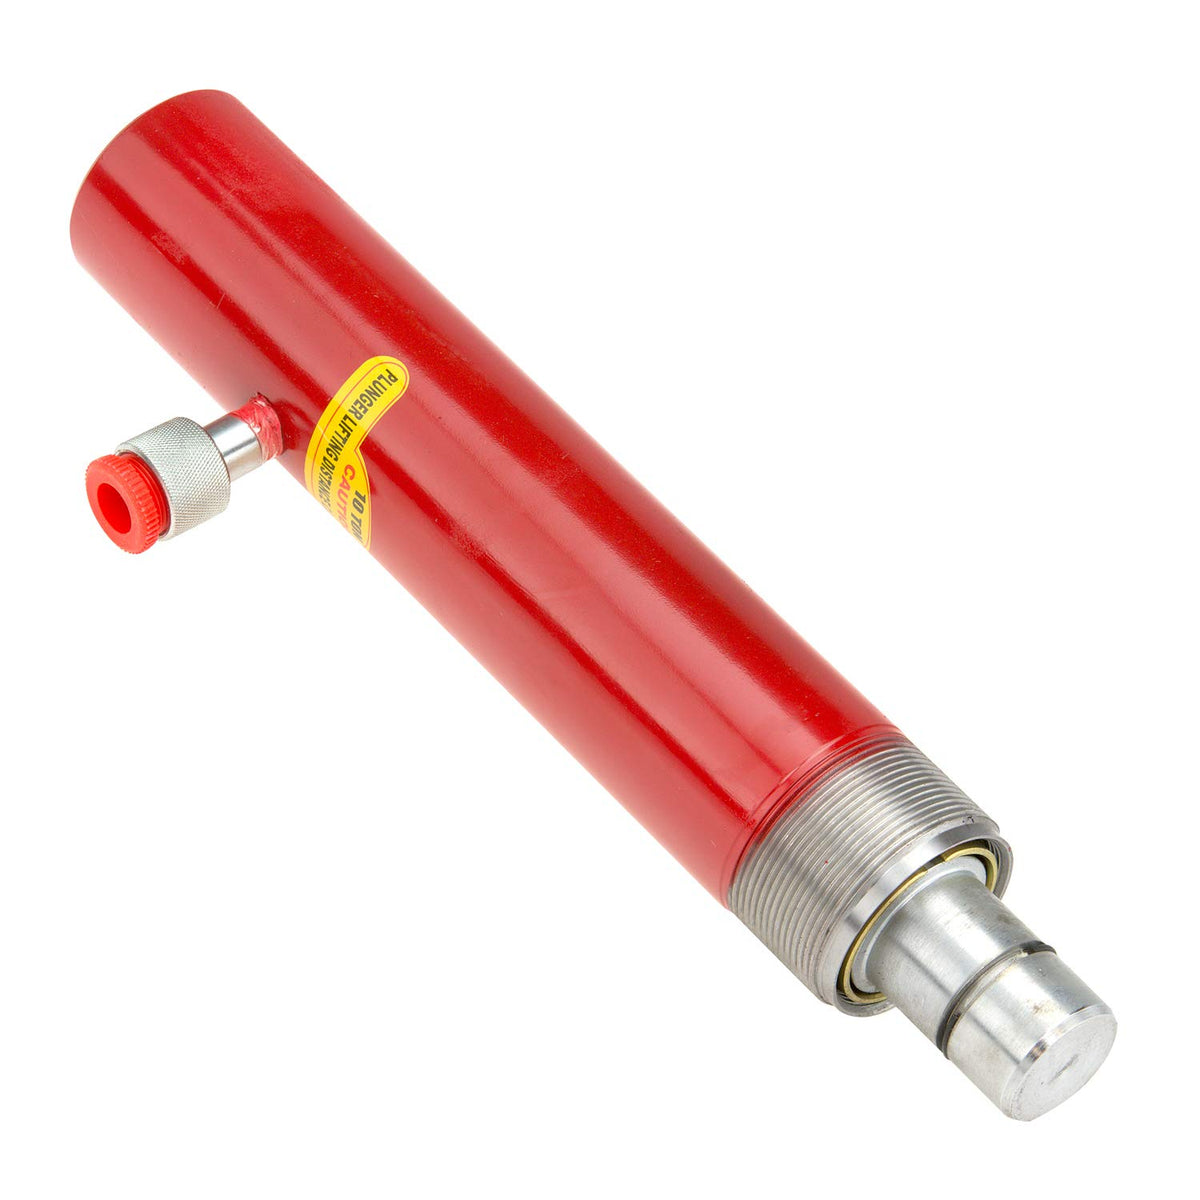 Replacement Hydraulic Ram for 10 Ton Porta Power - tool